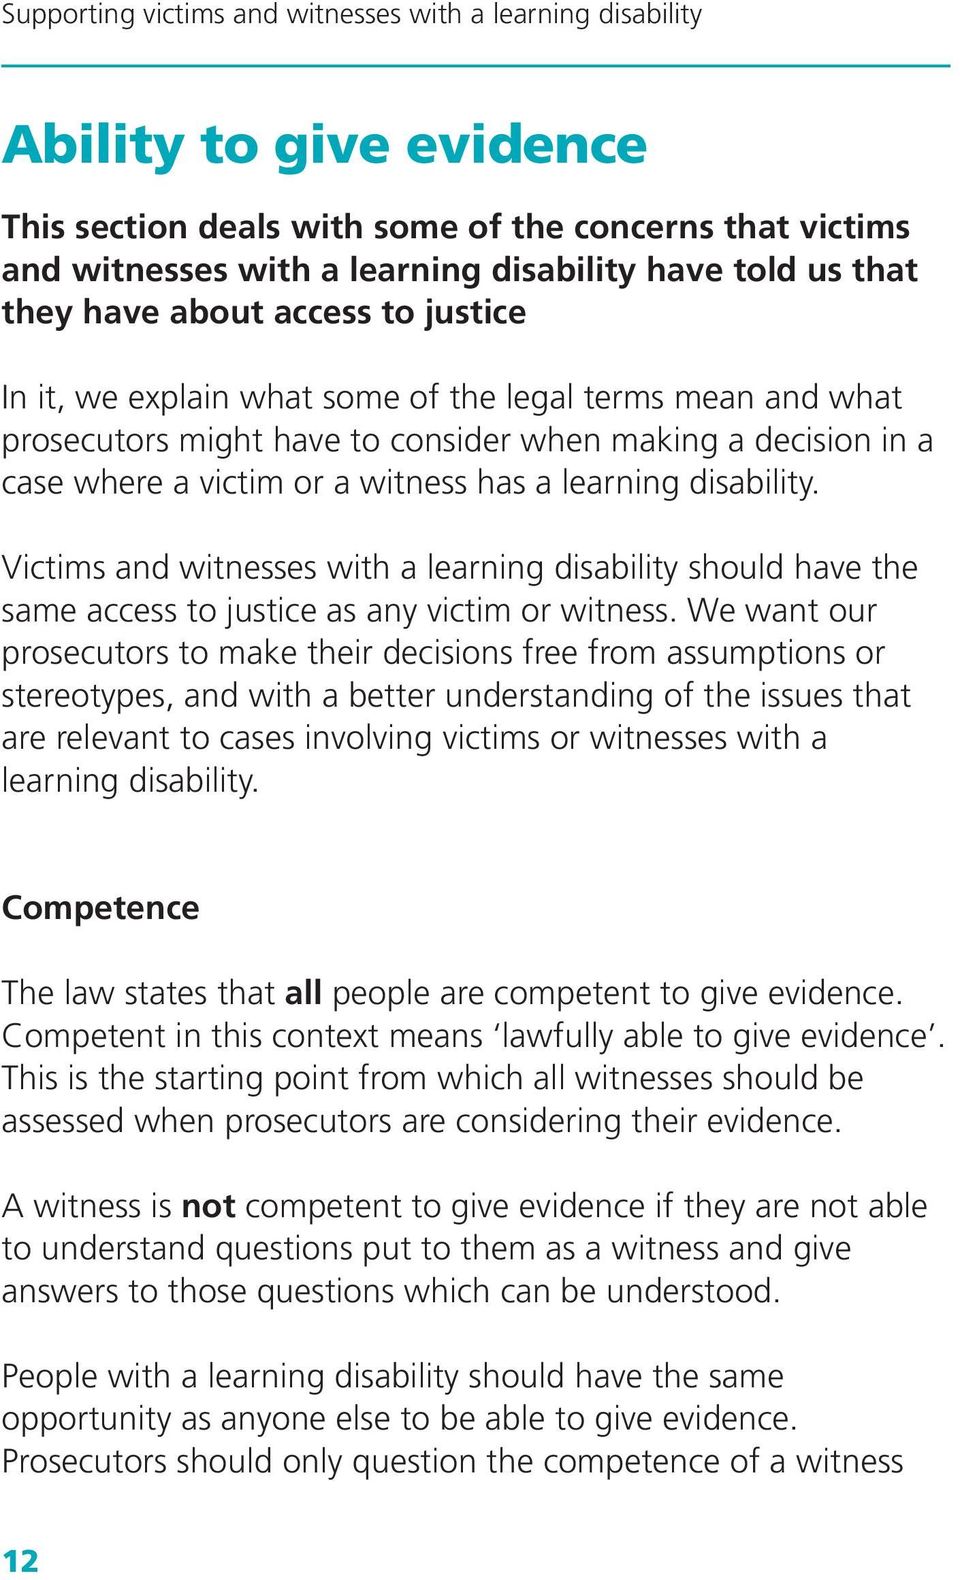 Victims and witnesses with a learning disability should have the same access to justice as any victim or witness.